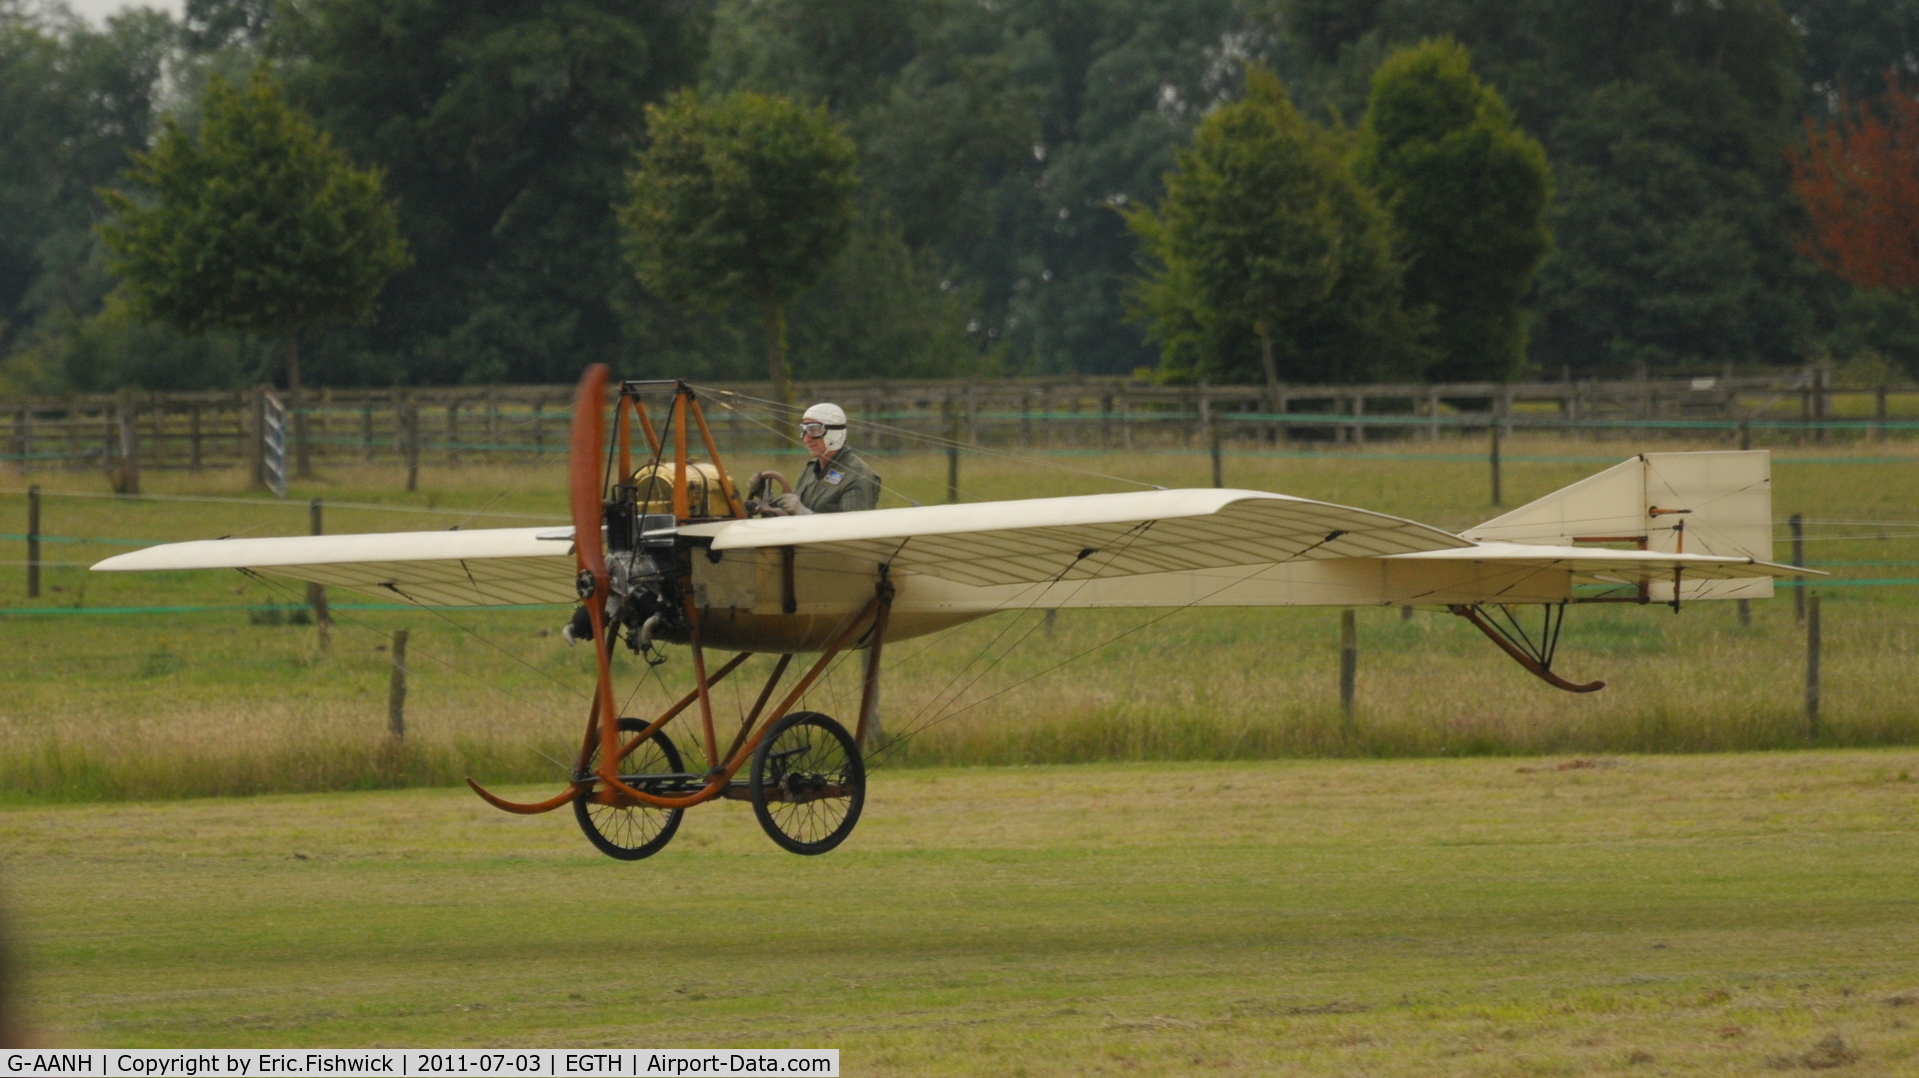 G-AANH, 1910 Deperdussin Monoplane Type D C/N BAPC005, 41. G-AANH at Shuttleworth Military Pagent Air Display, July 2011